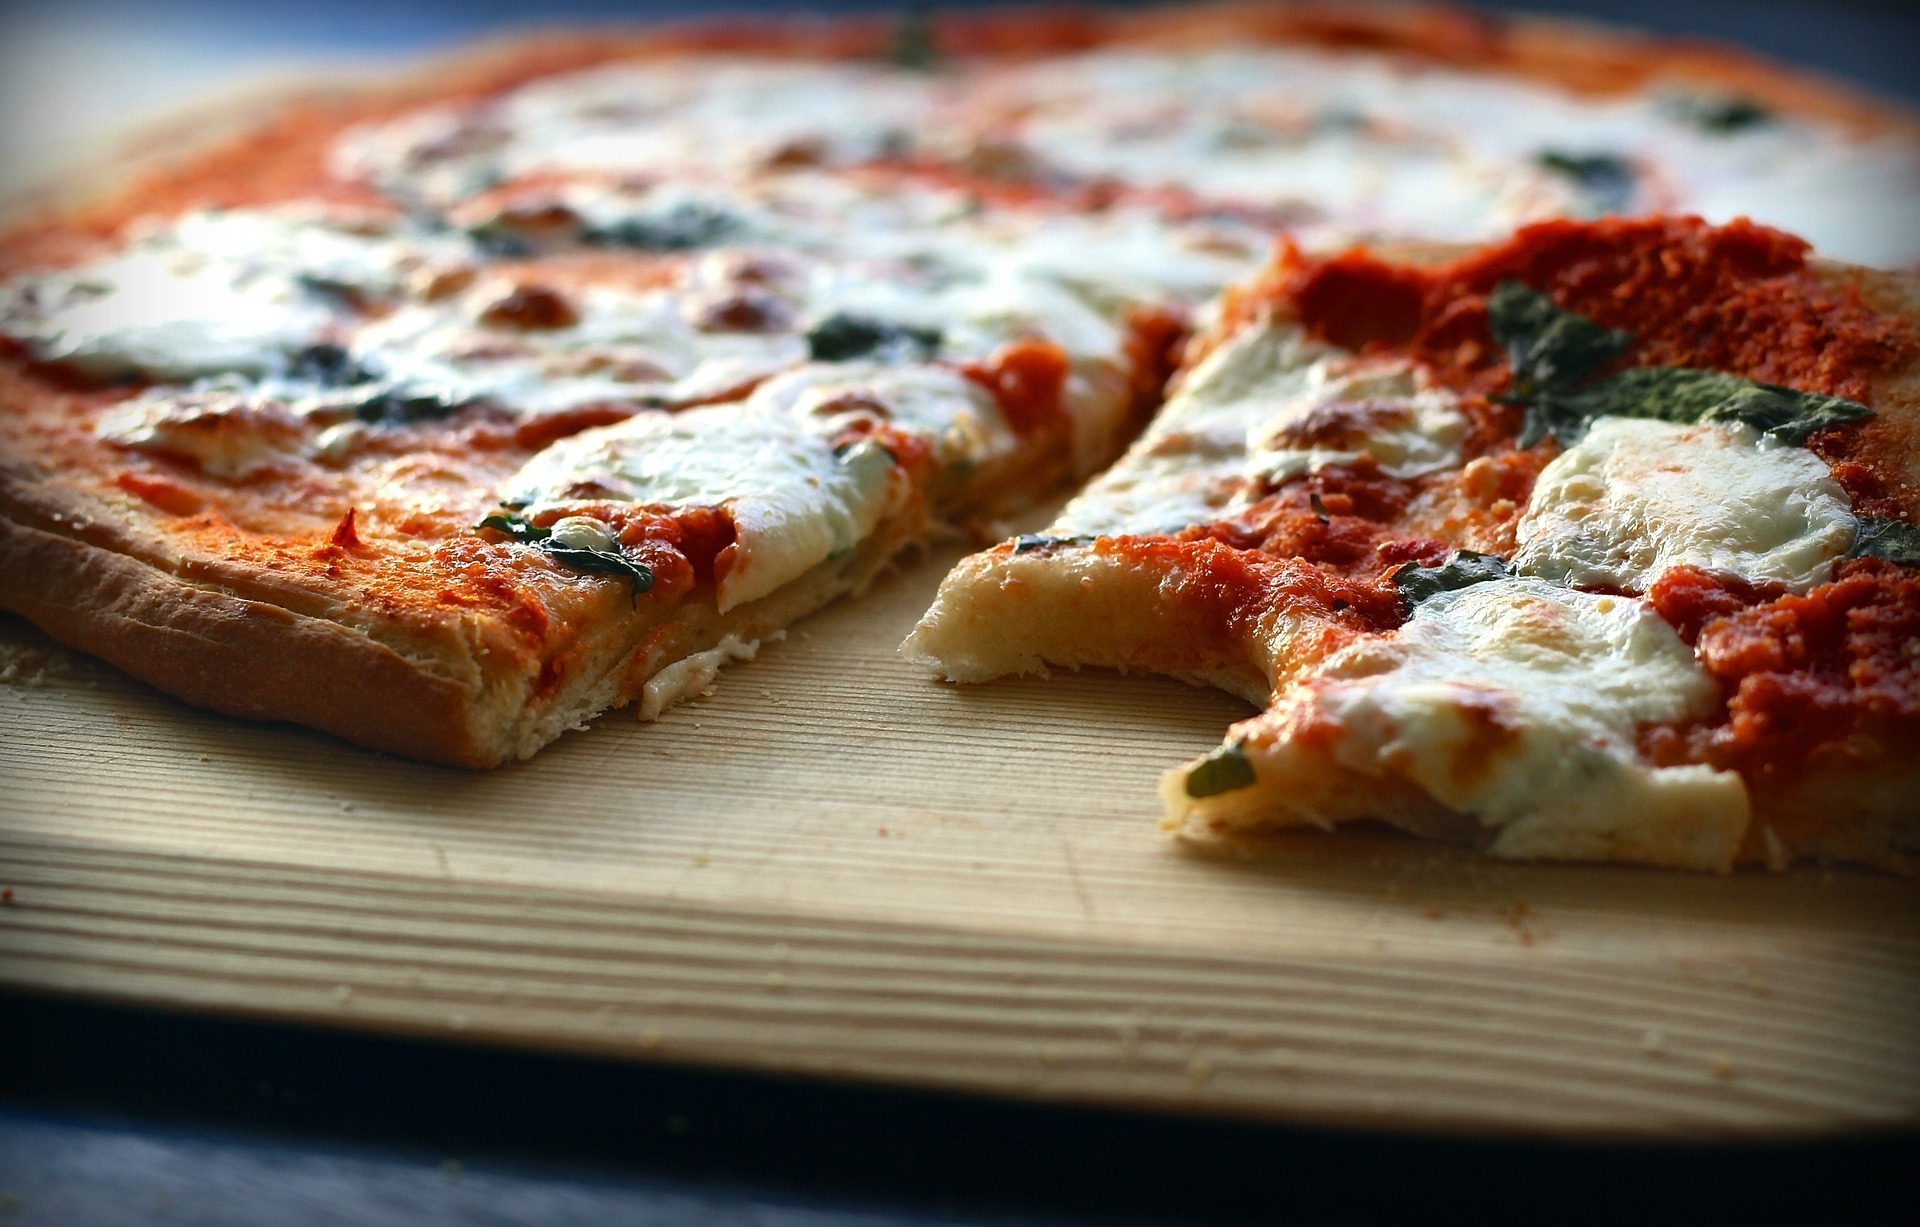 A close-up of a pizza on a plate